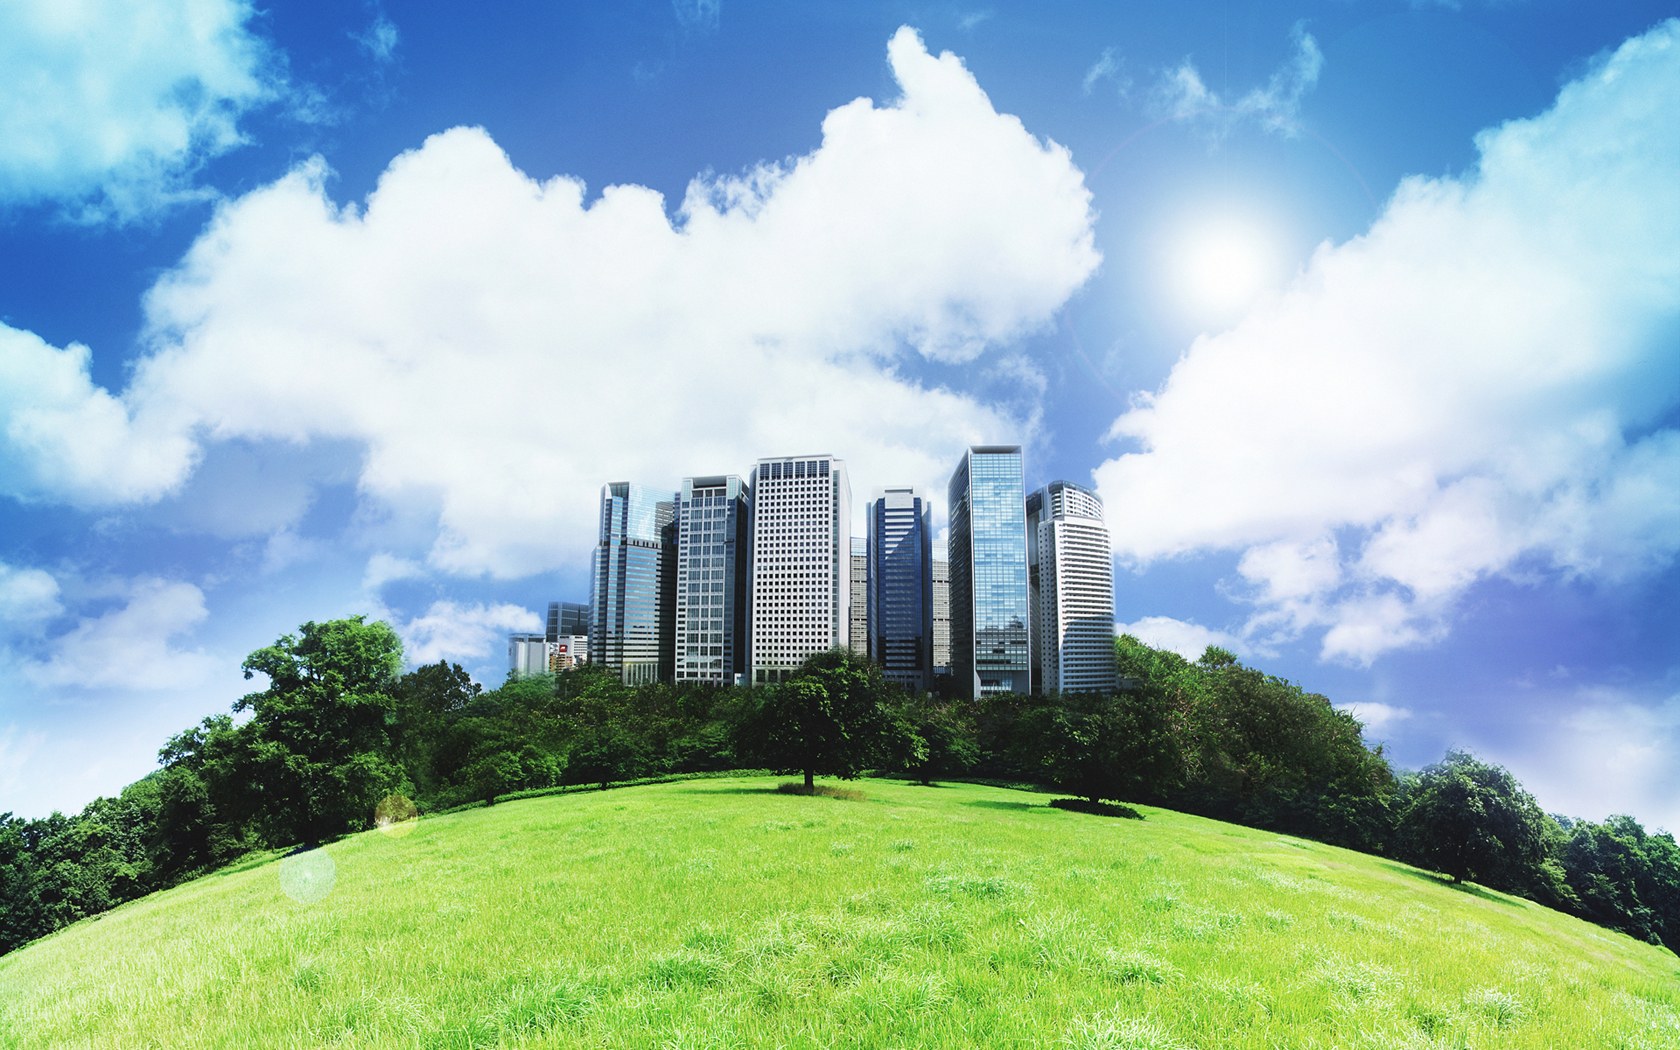 Artistic Green City Hd Wallpapers